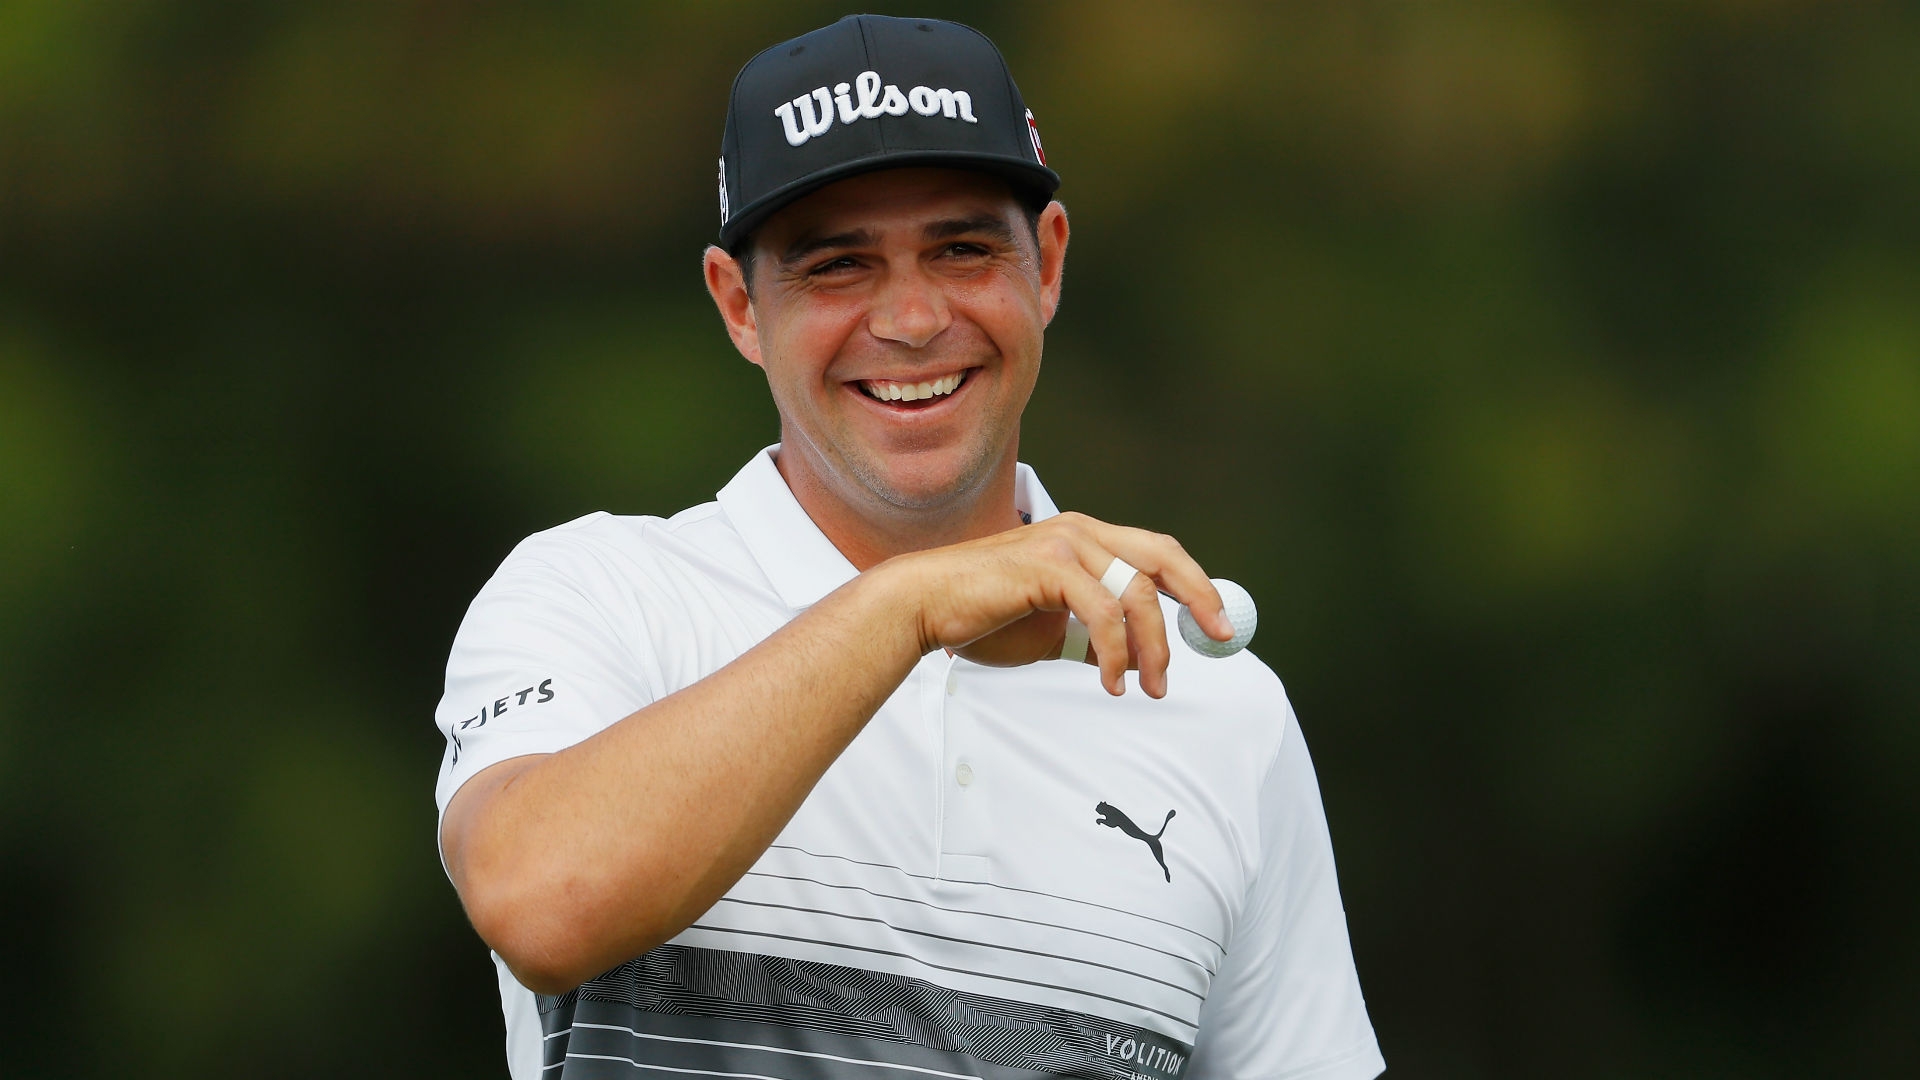 Gary Woodland Looks Good With Improved Short Game